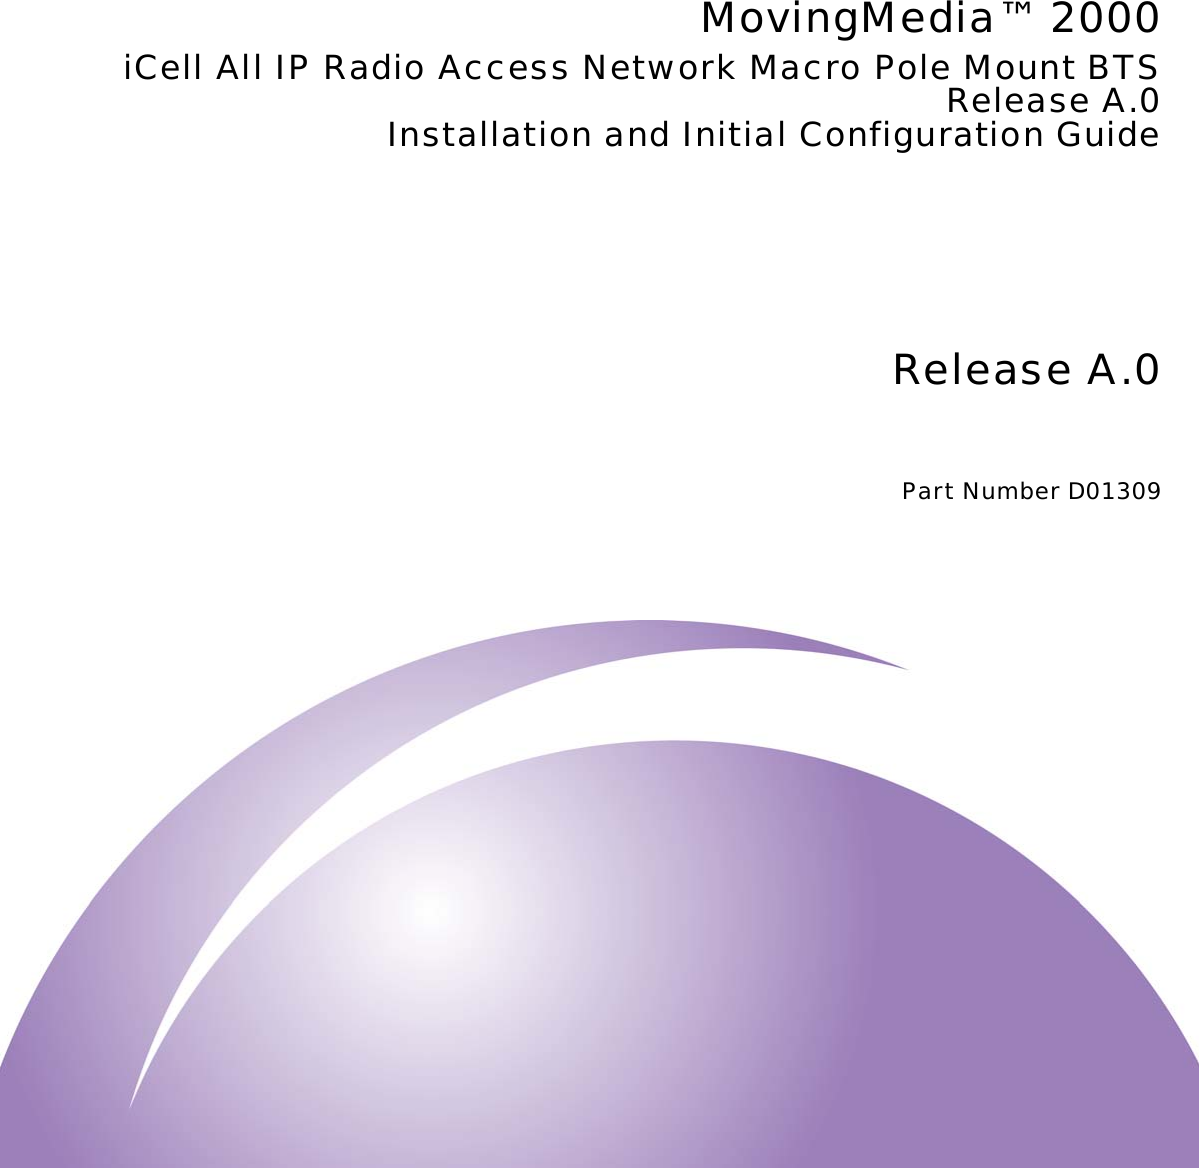 Release A.0Part Number D01309MovingMedia™ 2000iCell All IP Radio Access Network Macro Pole Mount BTSRelease A.0Installation and Initial Configuration Guide